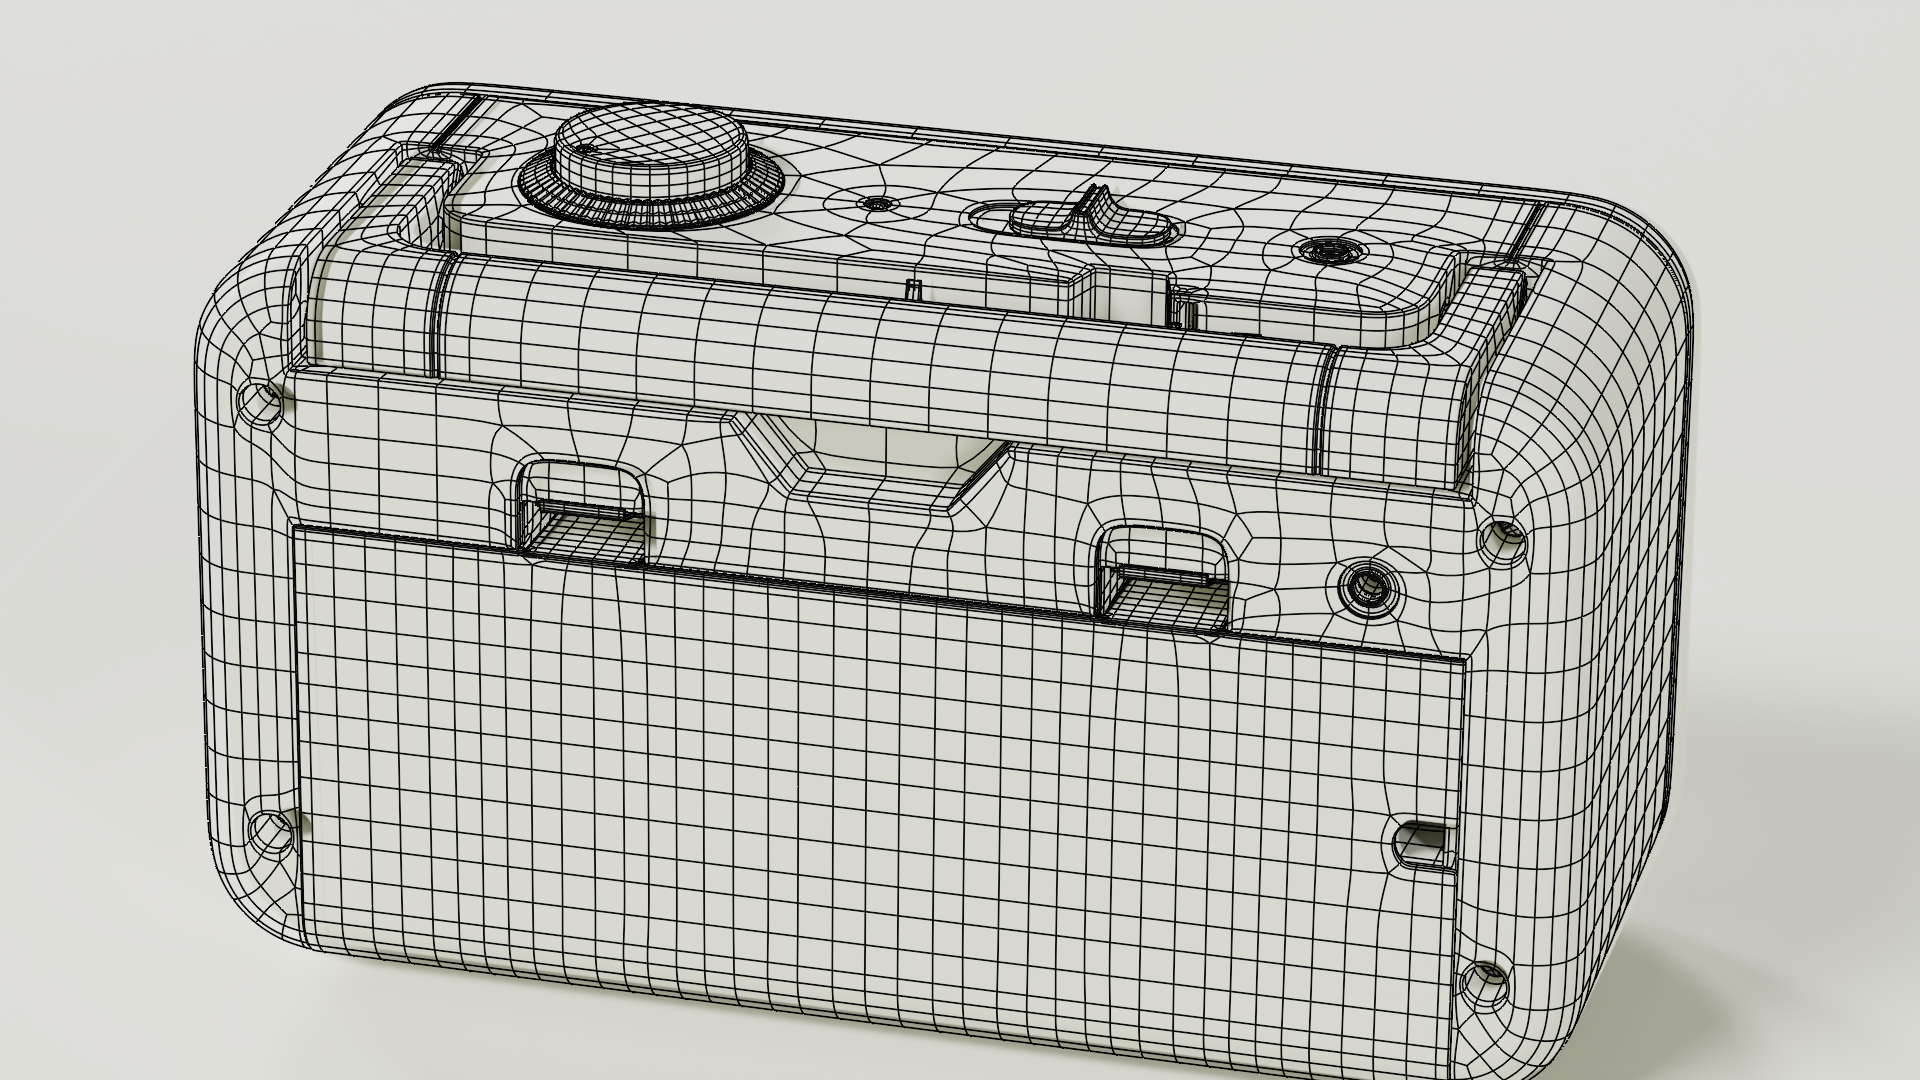 TZS First Austria AM/FM Radio Receiver - Finished Projects - Blender  Artists Community